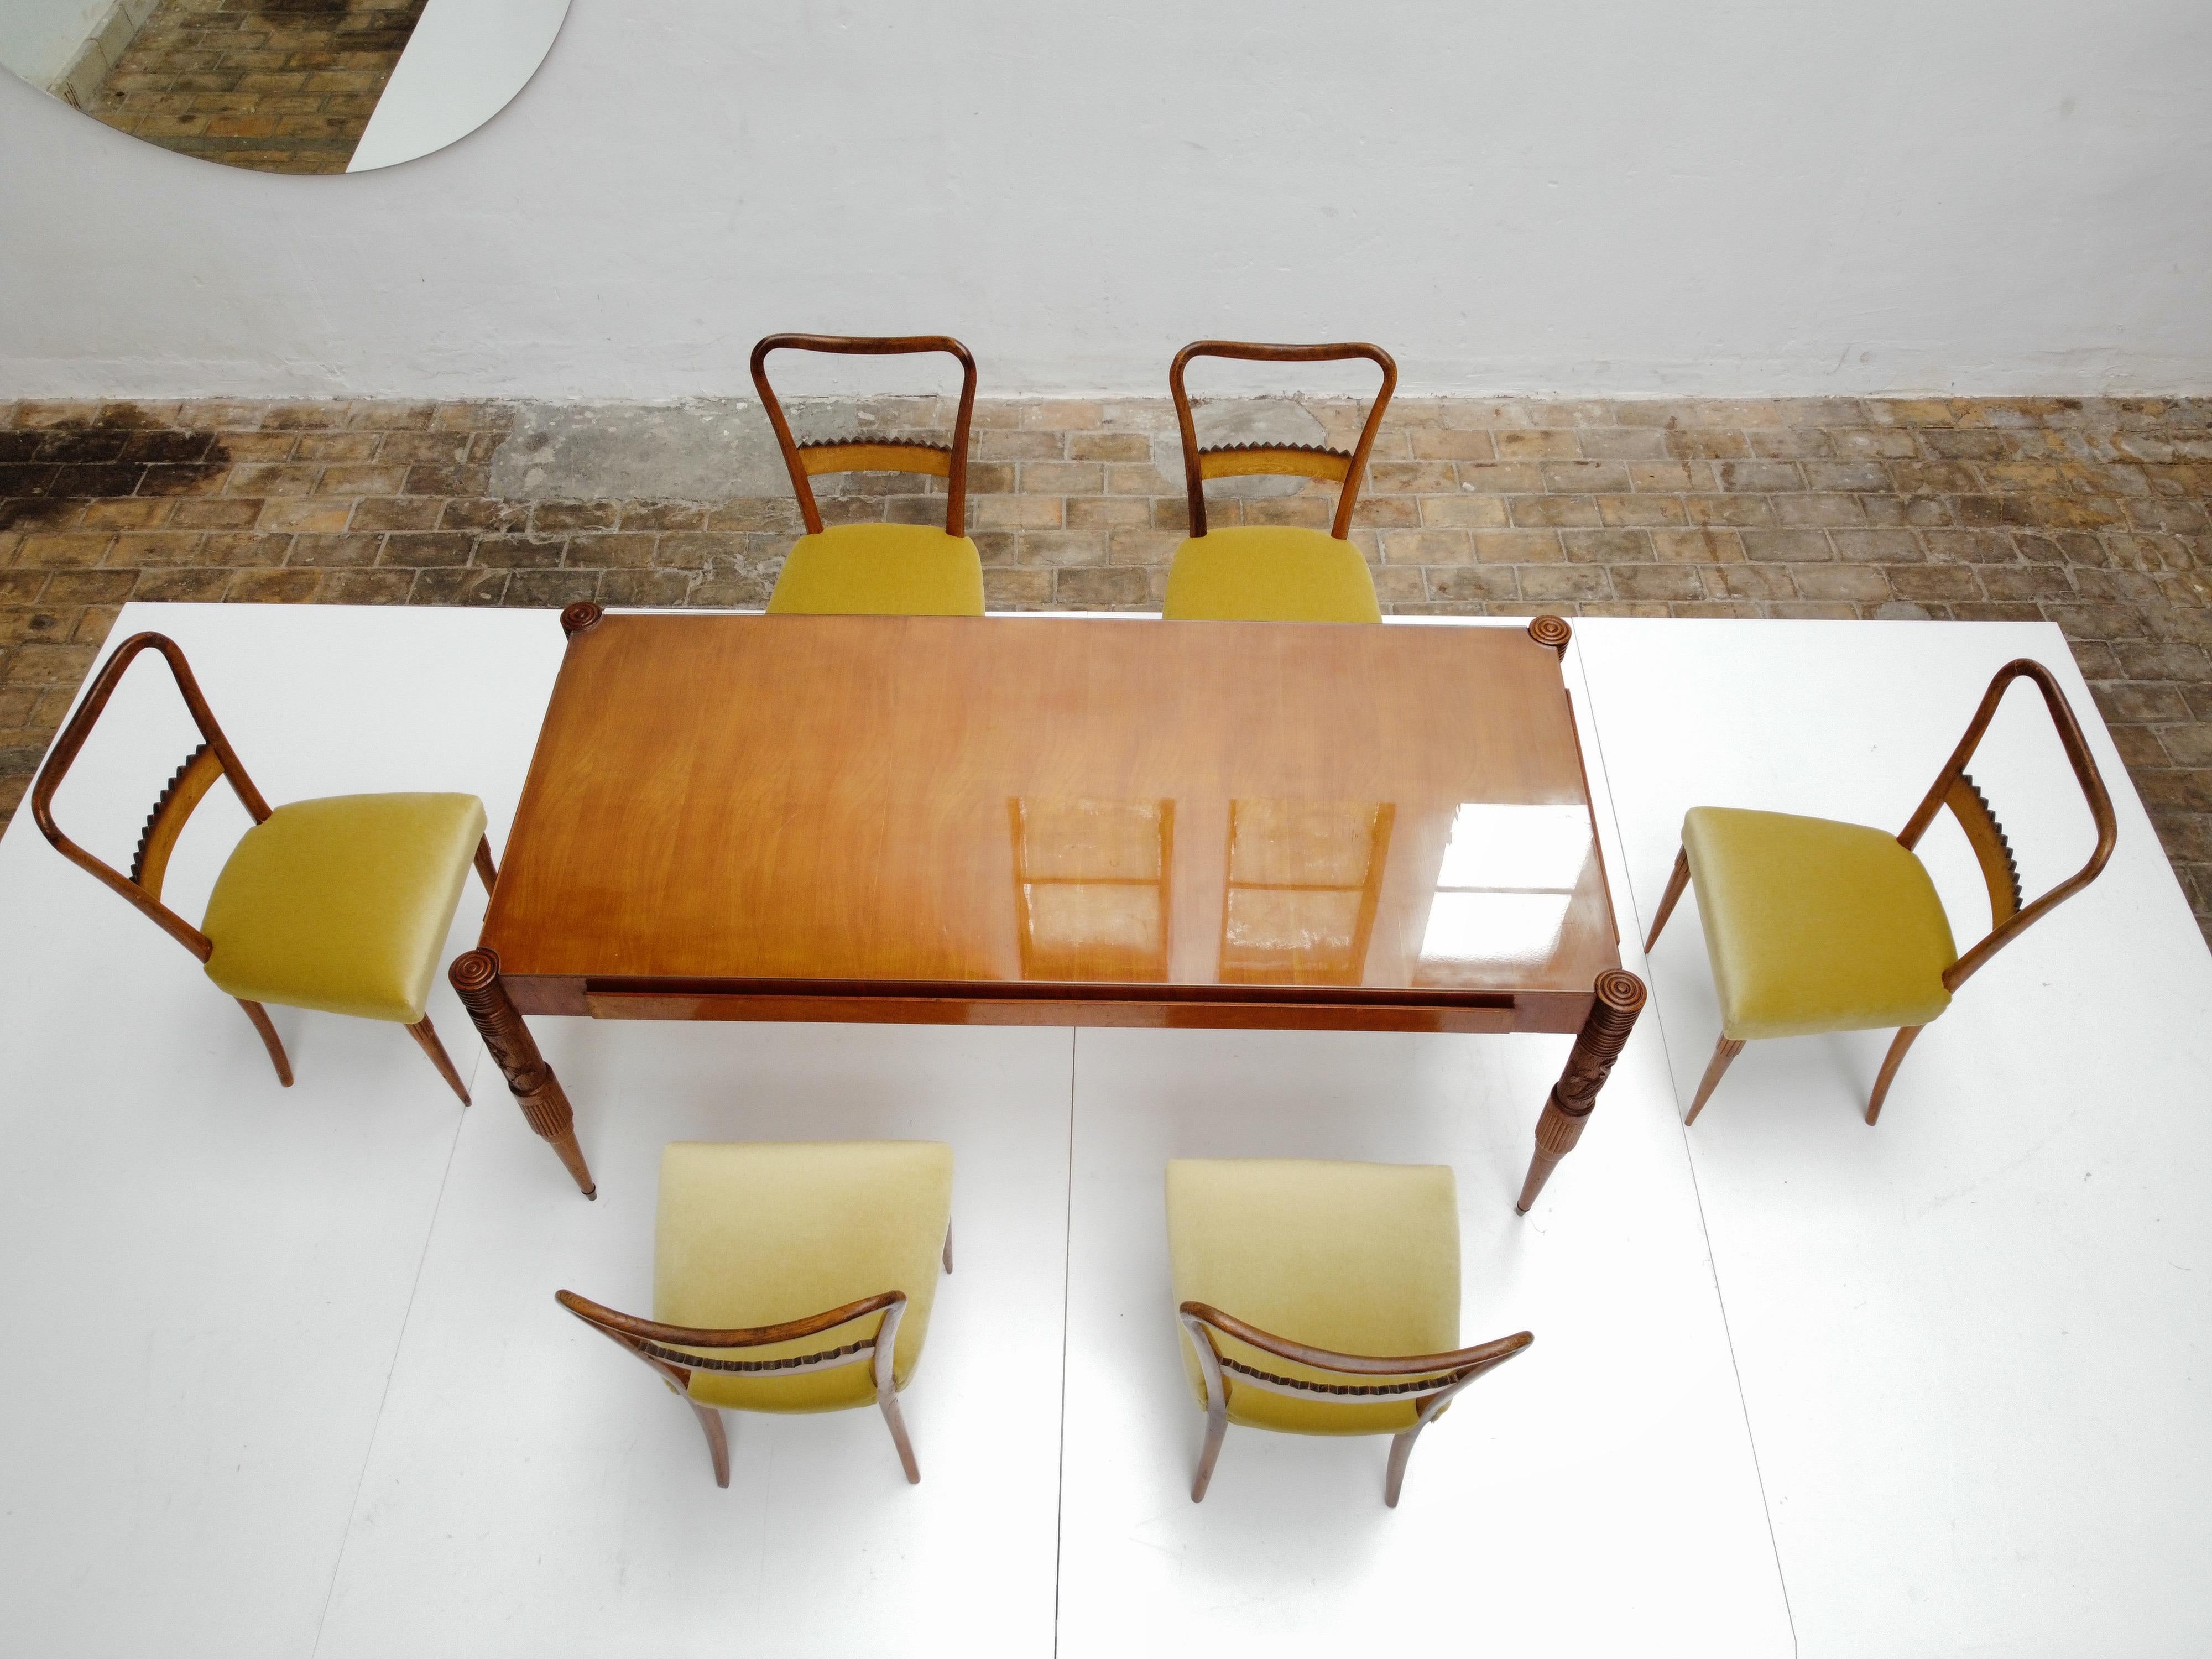 Hand-Crafted Walnut & Mohair Dining Set by Pier Luigi Colli for Fratelli Marelli, Italy, 1950 For Sale